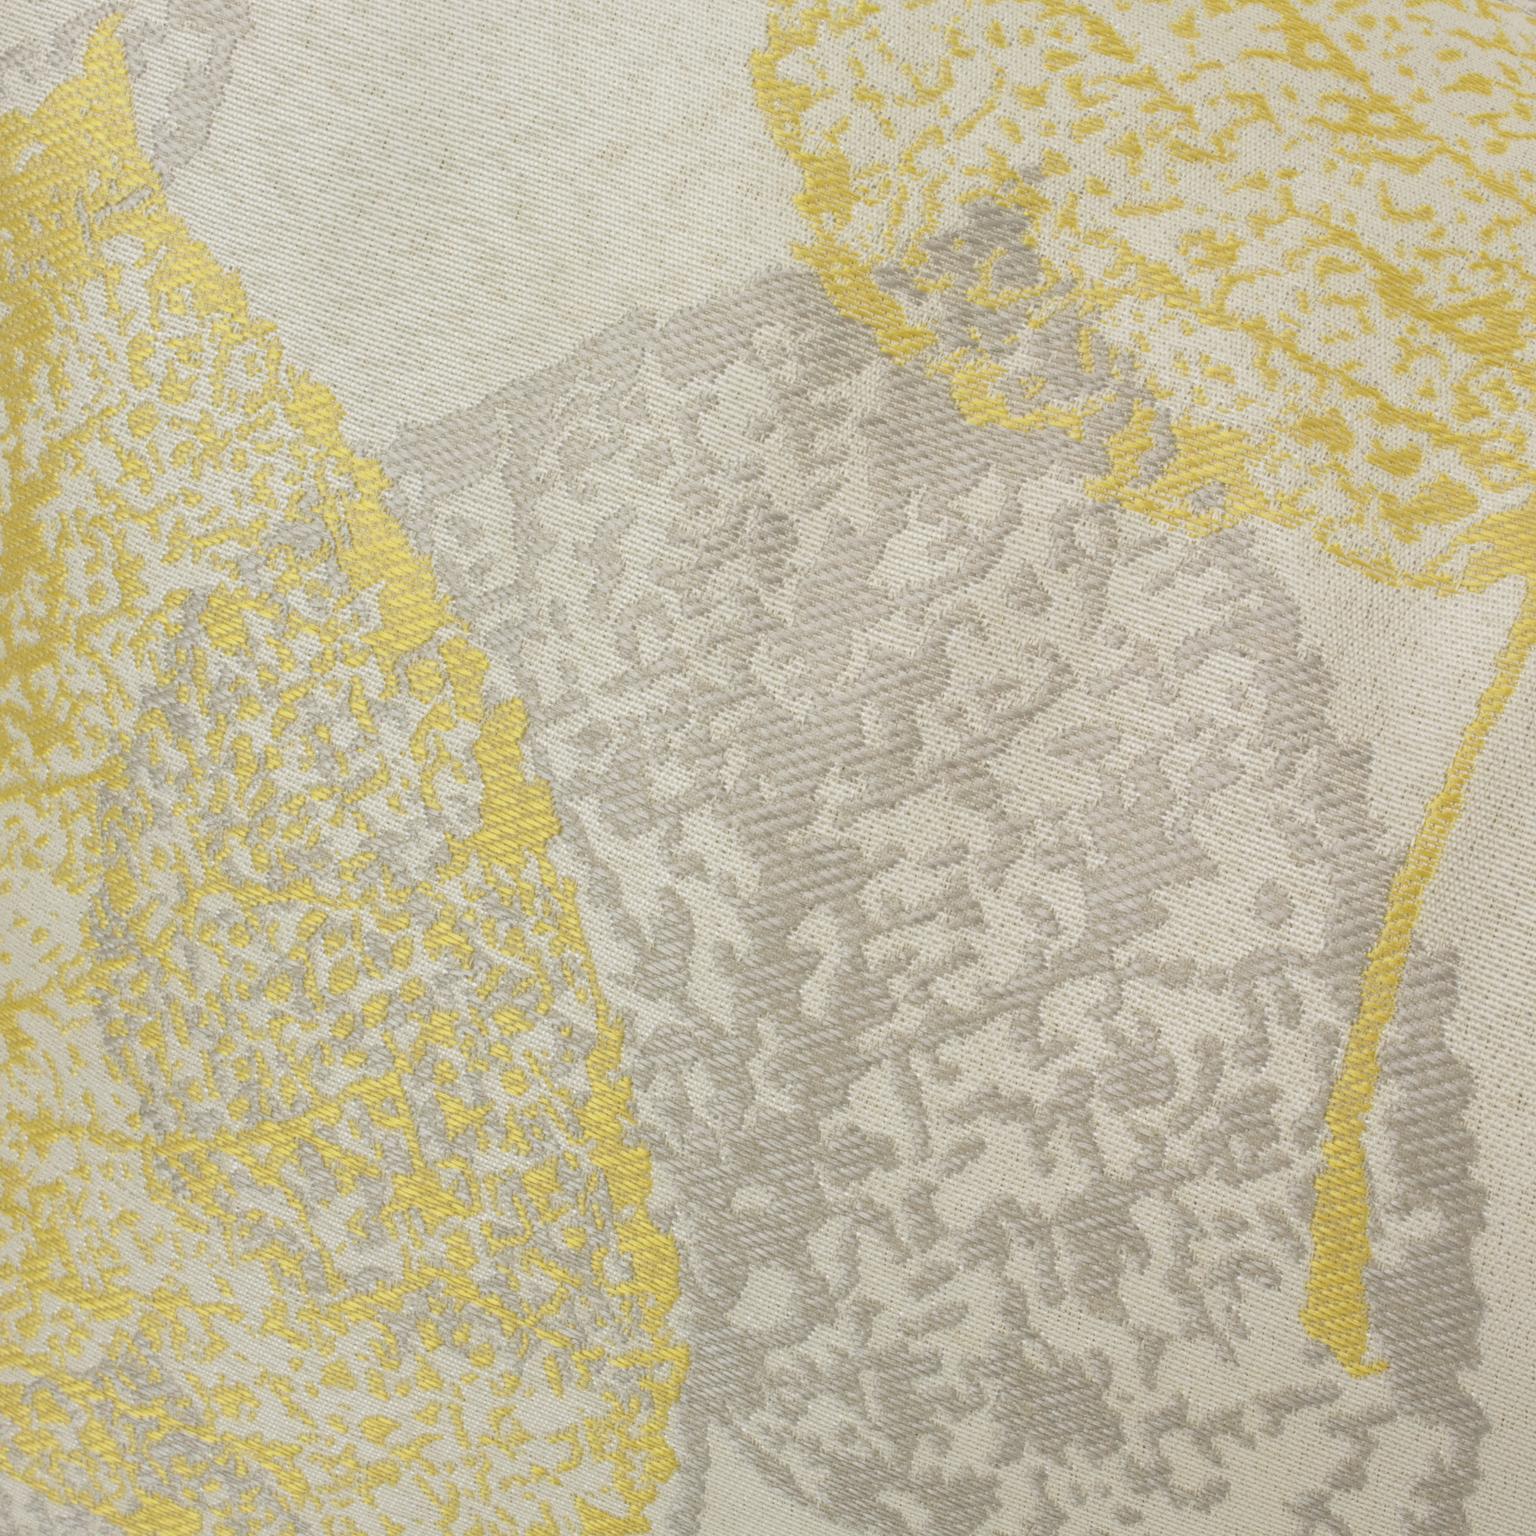 Contemporary Silver Gray and Yellow Damask Throw Pillows, a pair For Sale